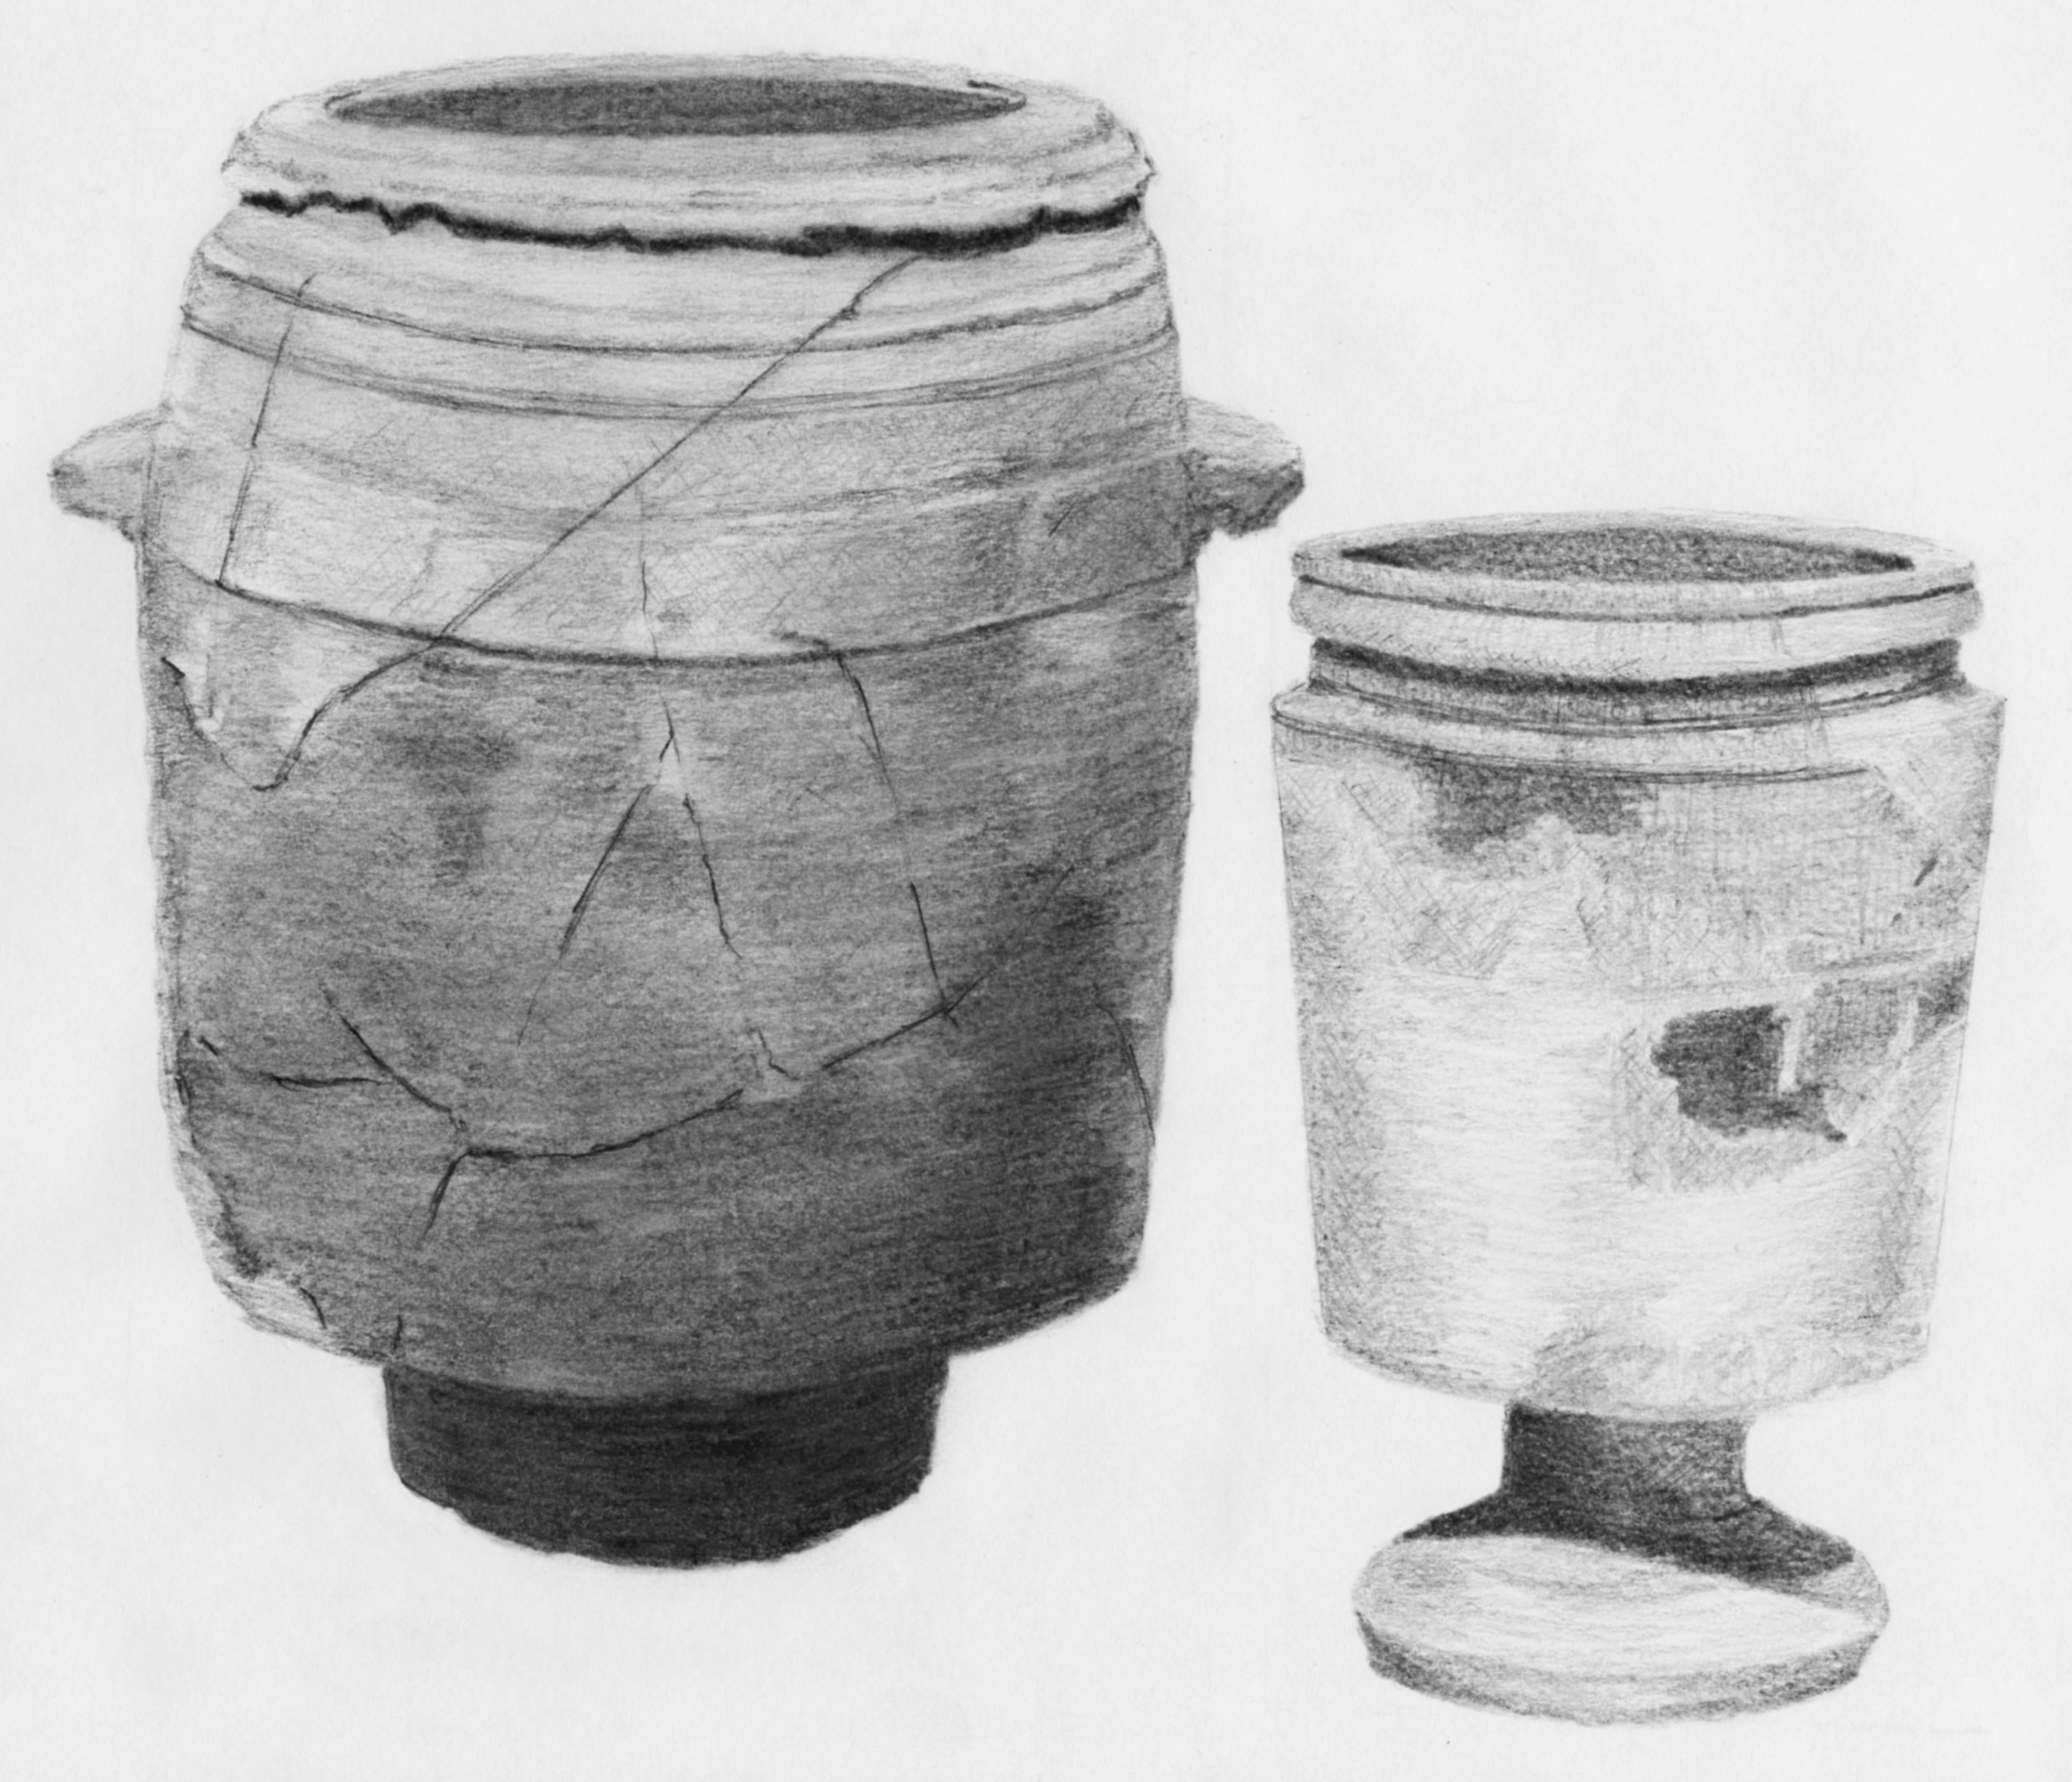 A drawing of limestone pots found in Israel.